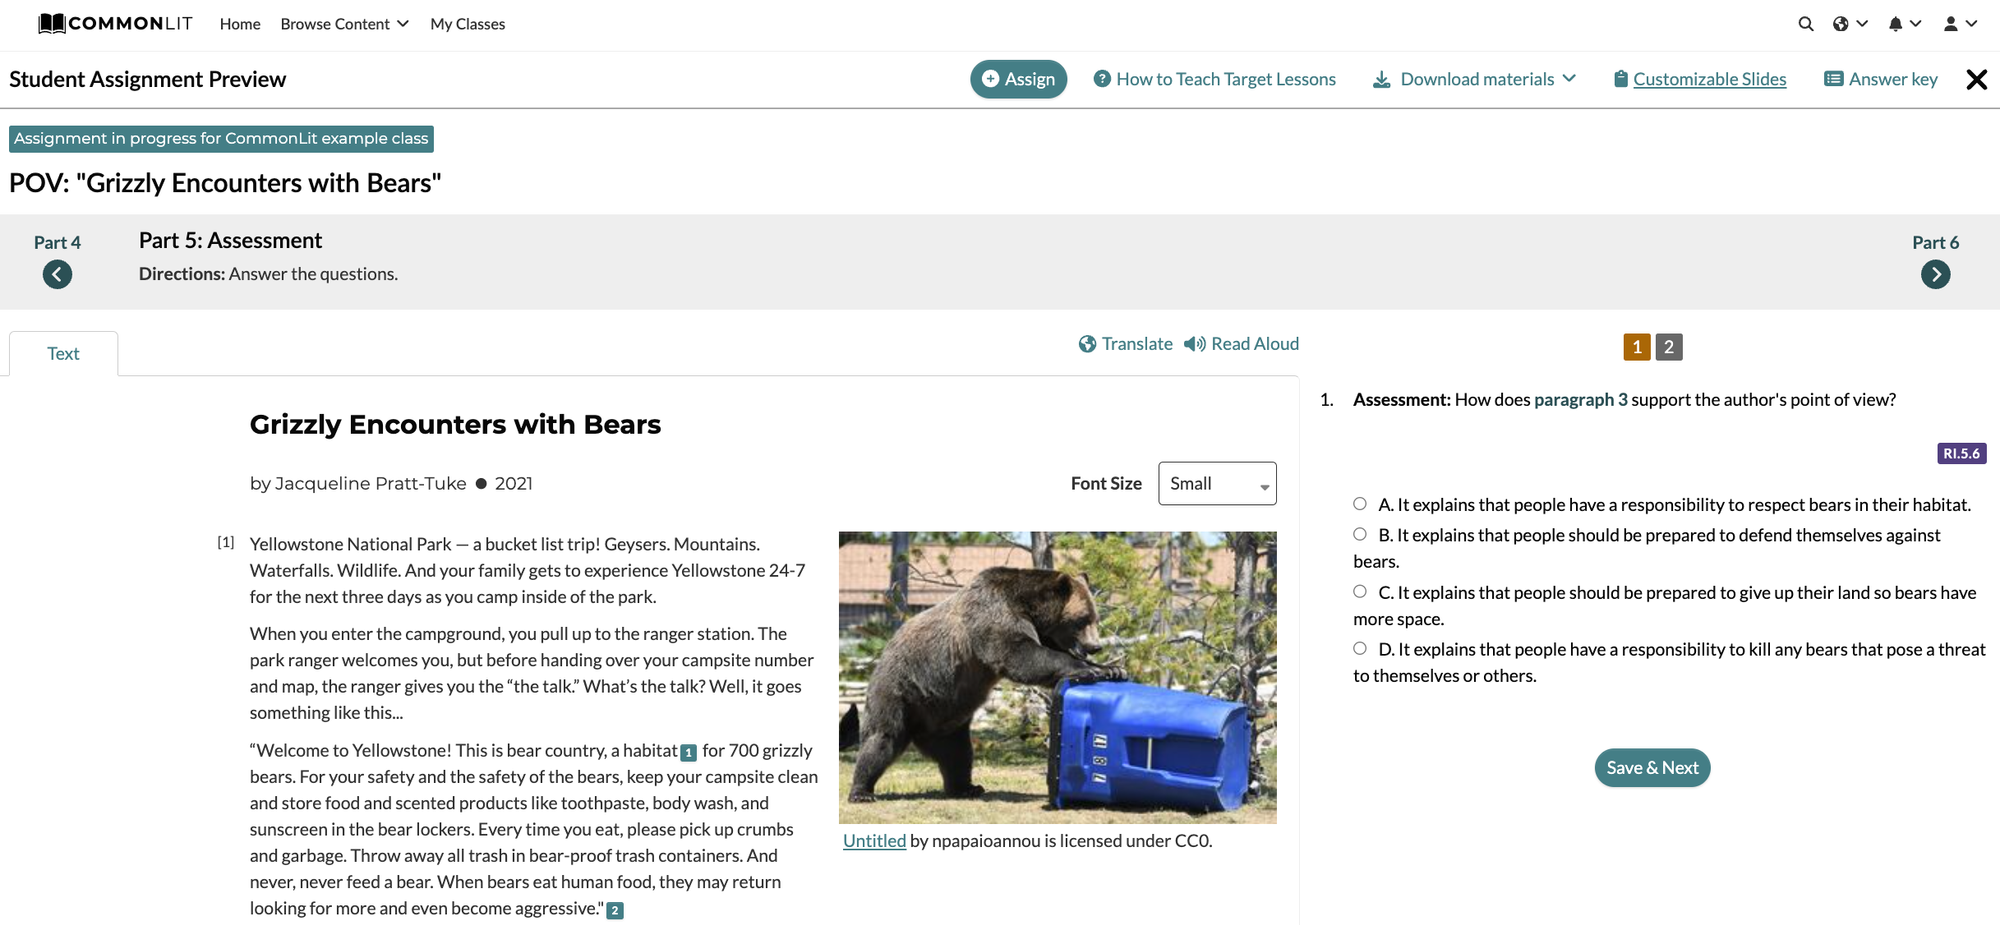 Screenshot of "Assessment" section in "Grizzly Encounters with Bears" lesson. 